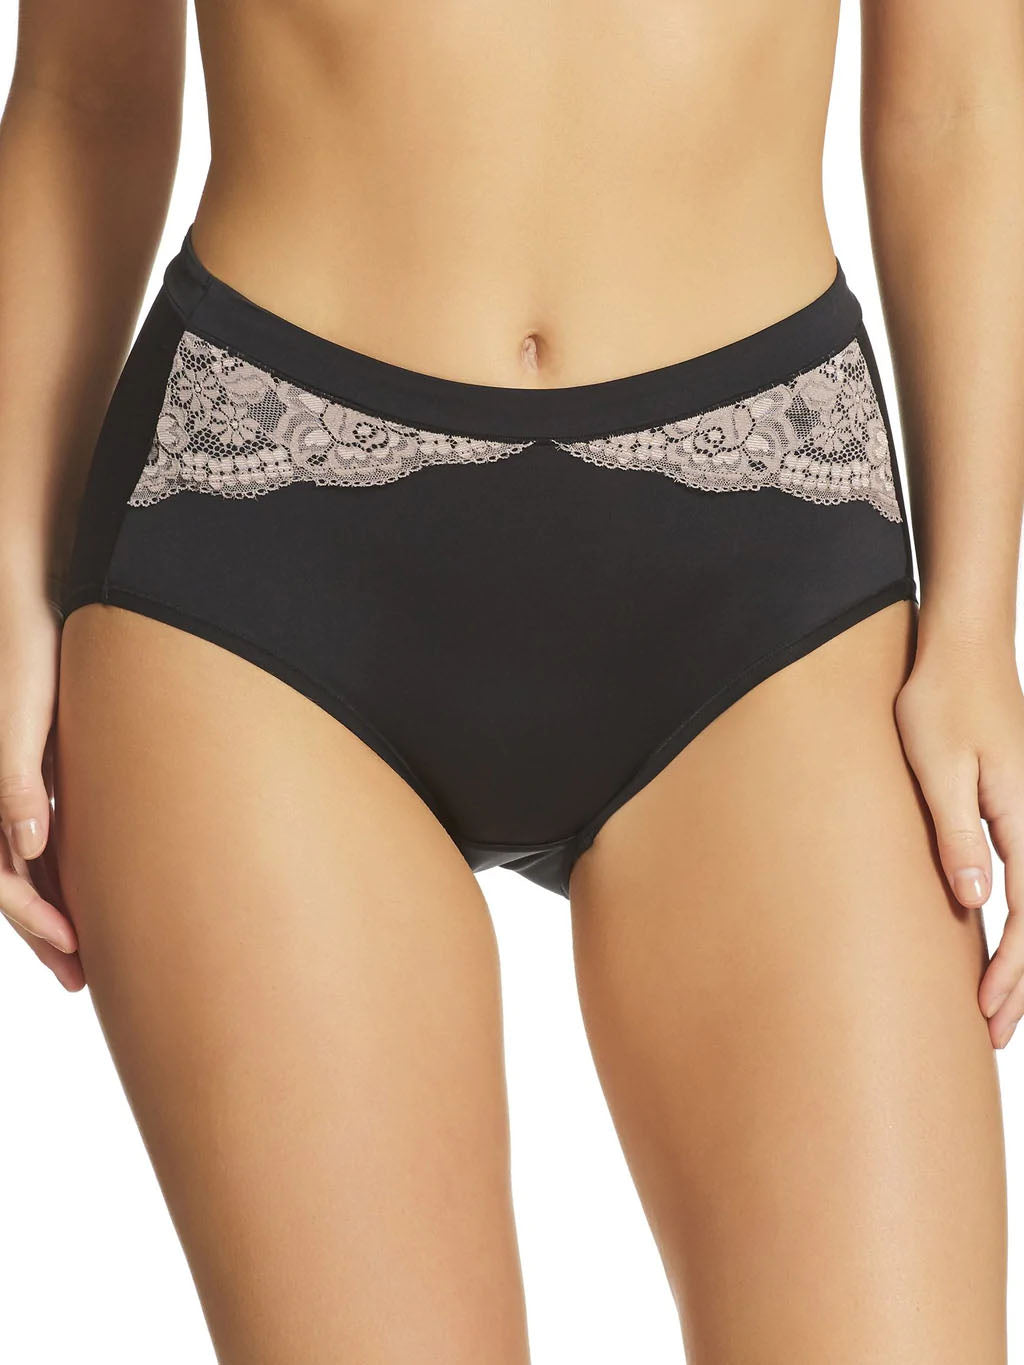 Bali S One Smooth U Comfort Indulgence Satin With Lace Brief Panty